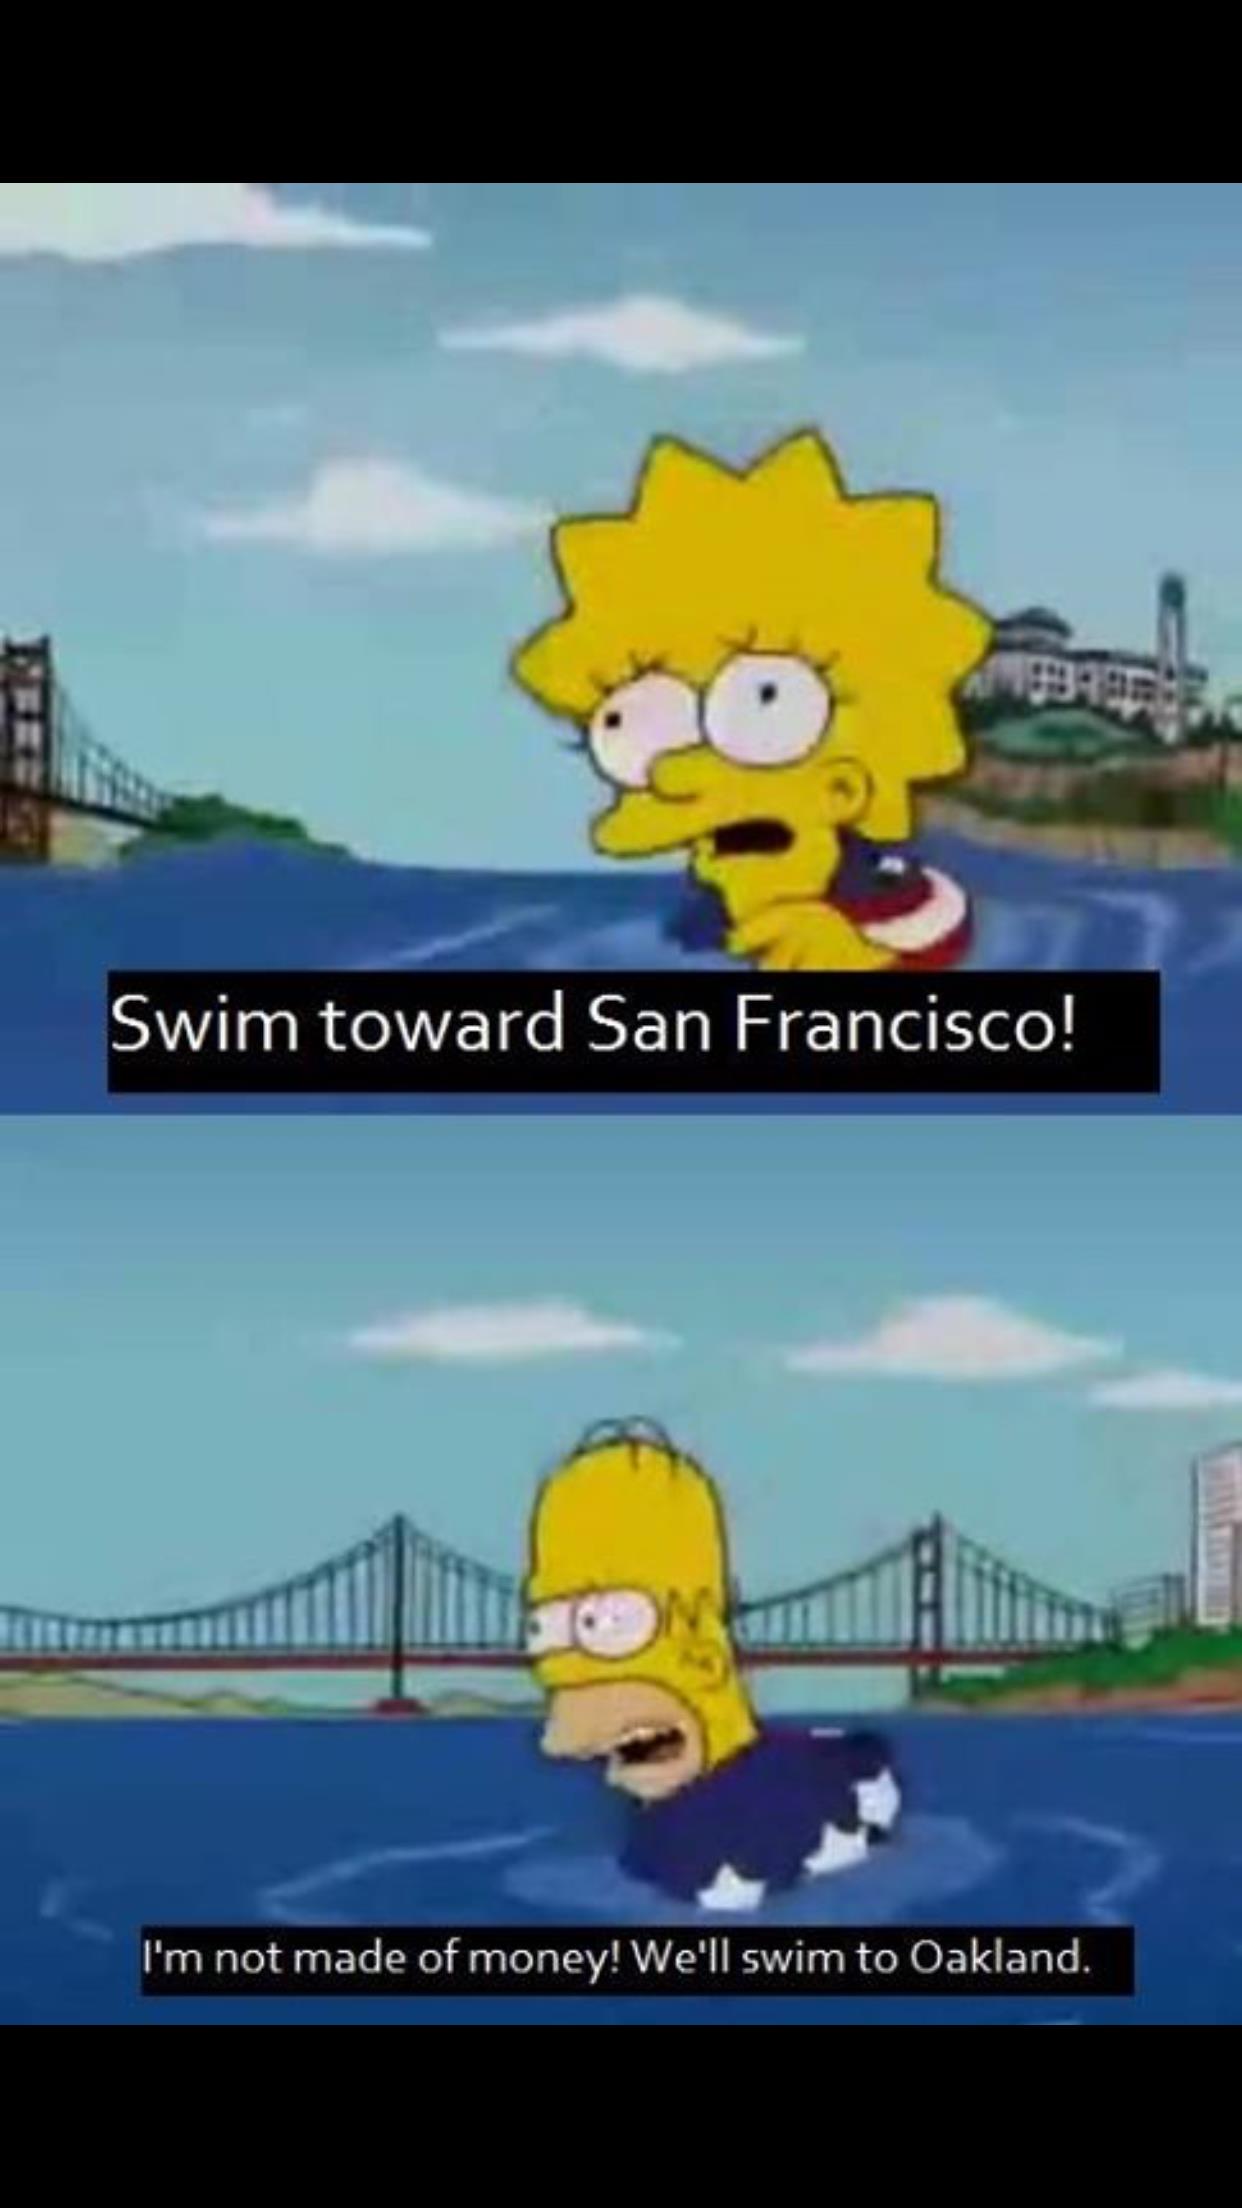 The Simpsons gets it.